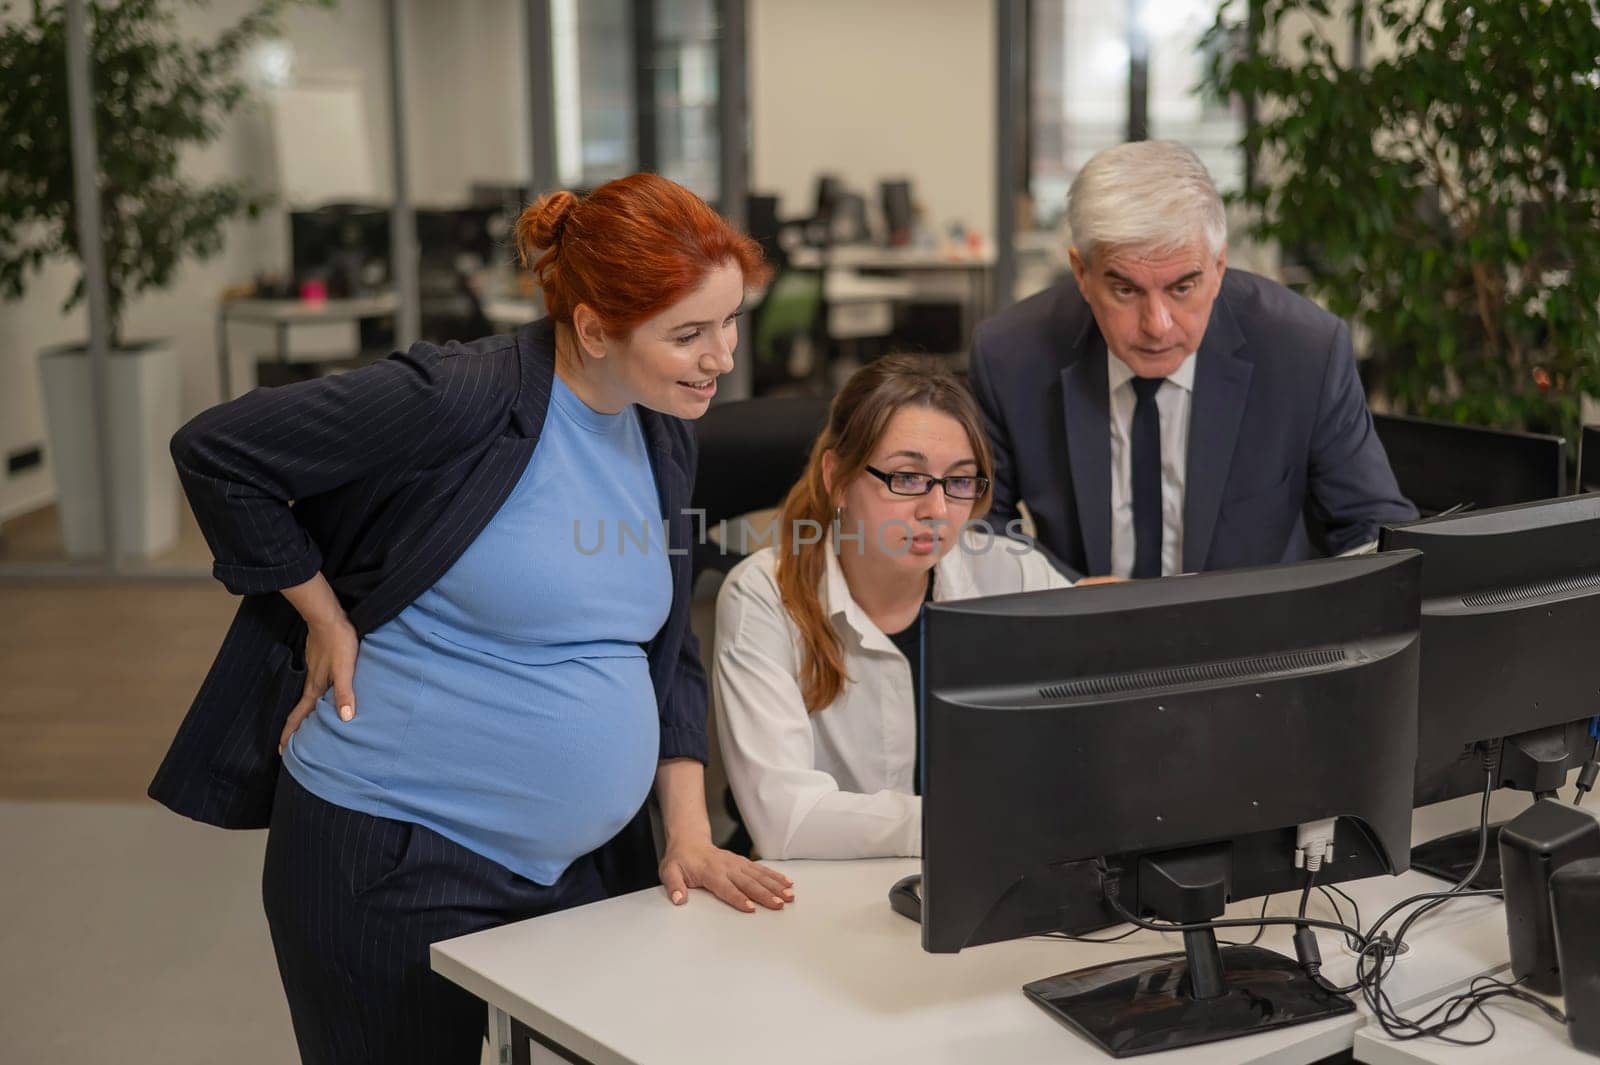 An elderly man, a Caucasian woman and a pregnant woman are discussing work issues at the computer